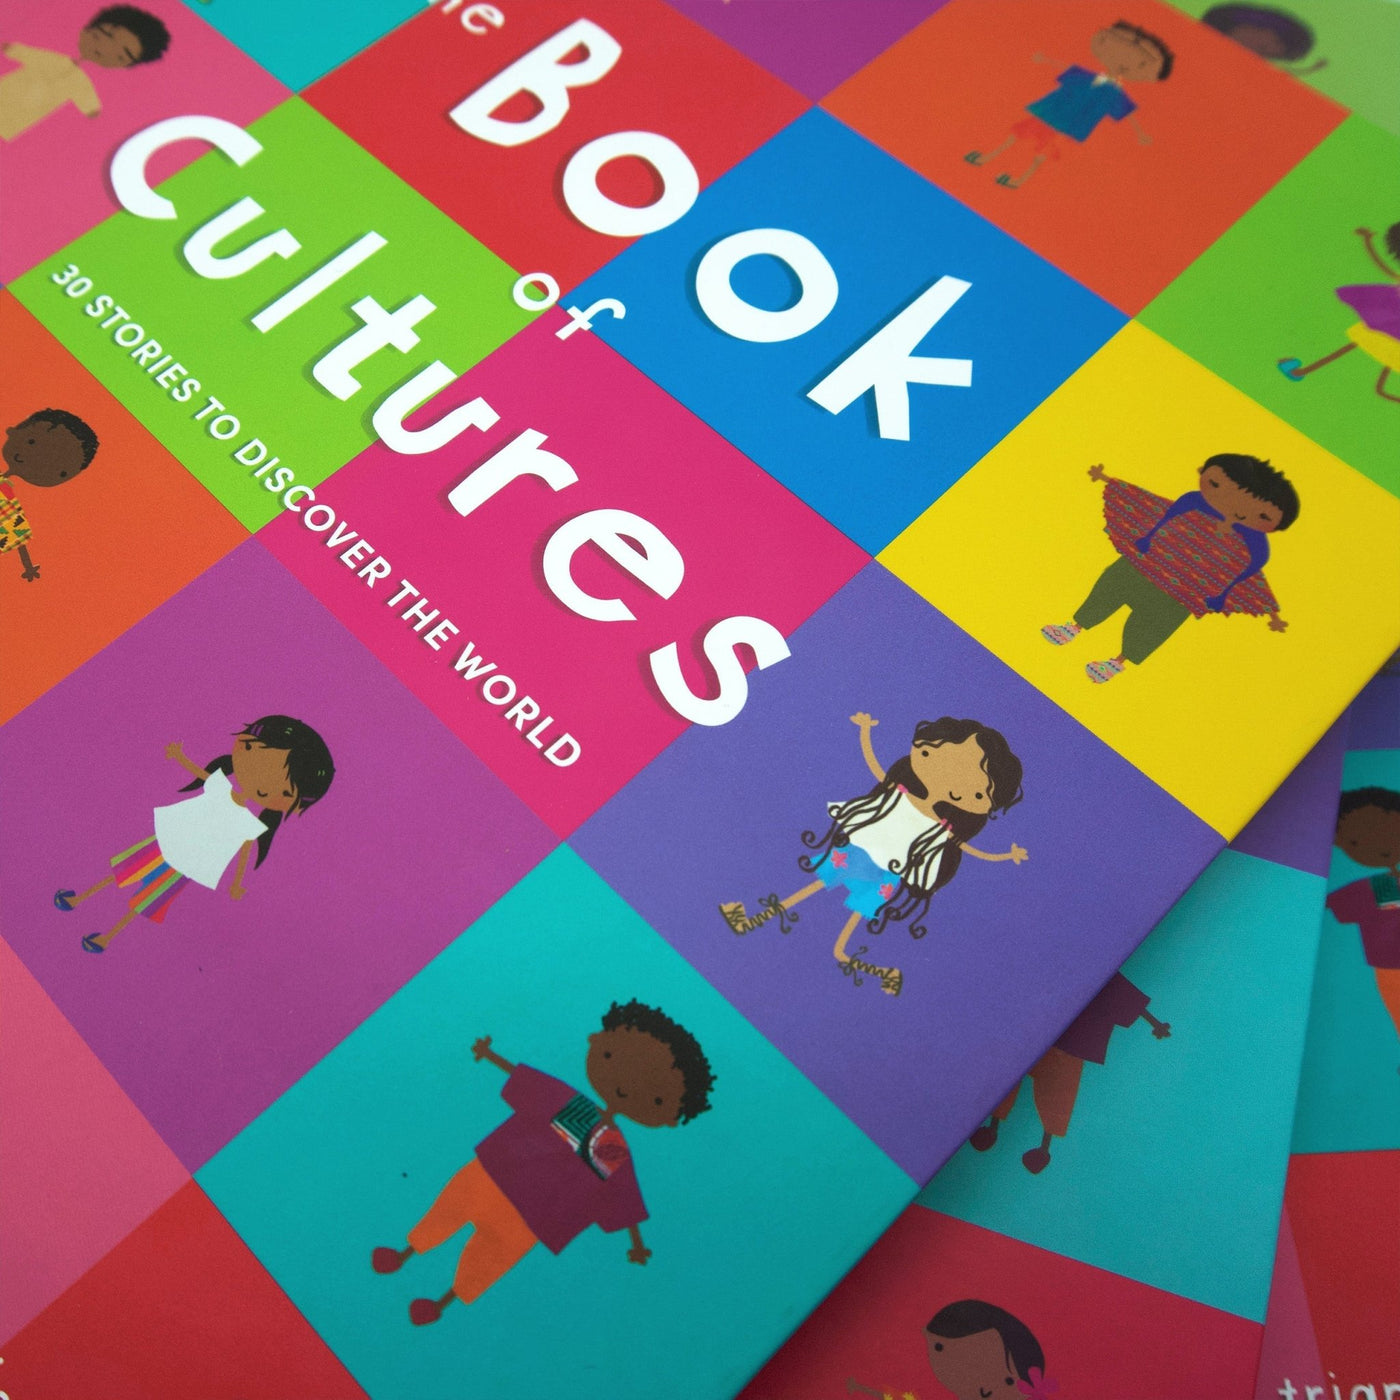 The Book of Cultures by Worldwide Buddies